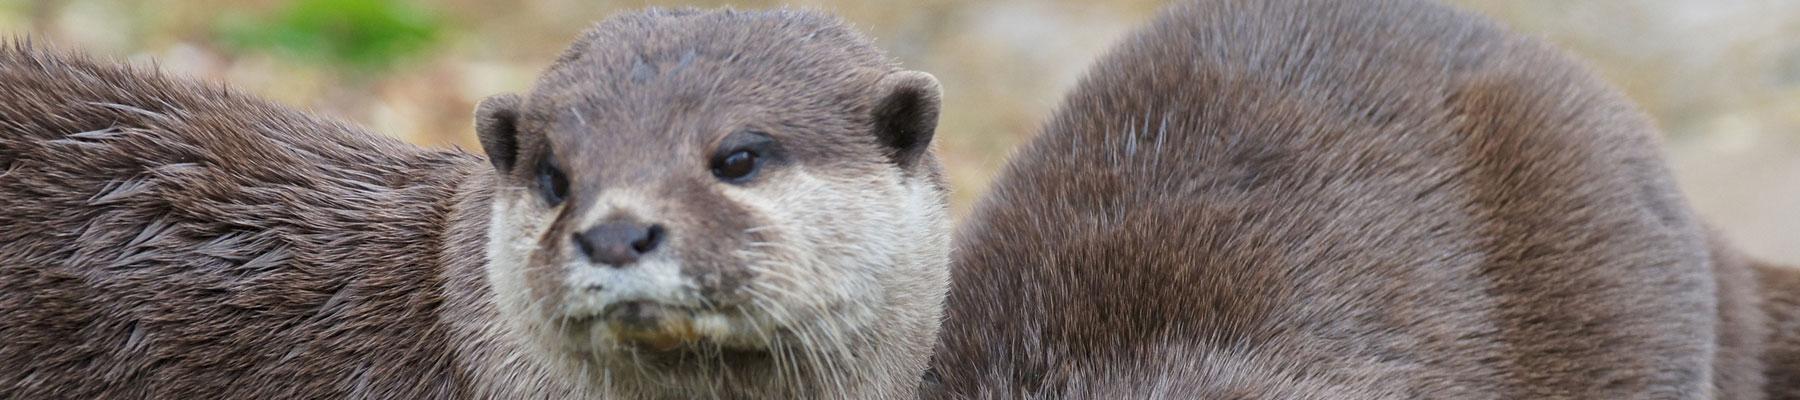 Asian Small-clawed Otter - now listed in CITES Appendix I. Photo used under CC BY-NC 2.0